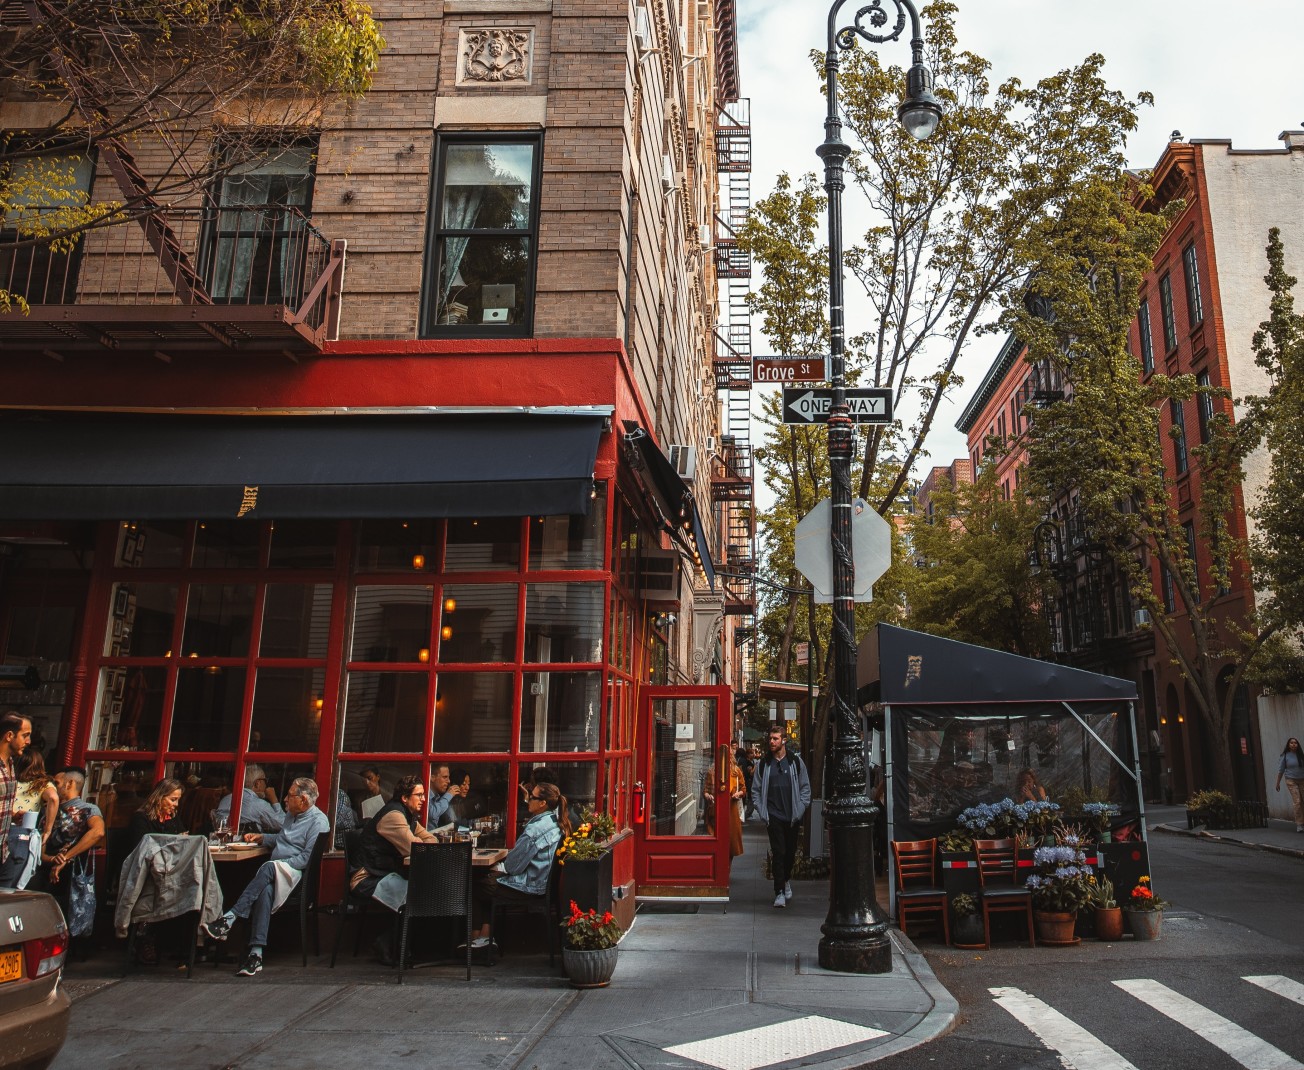 Local's Guide to Food, Shopping & More in Soho & Nolita - Places to eat & drink